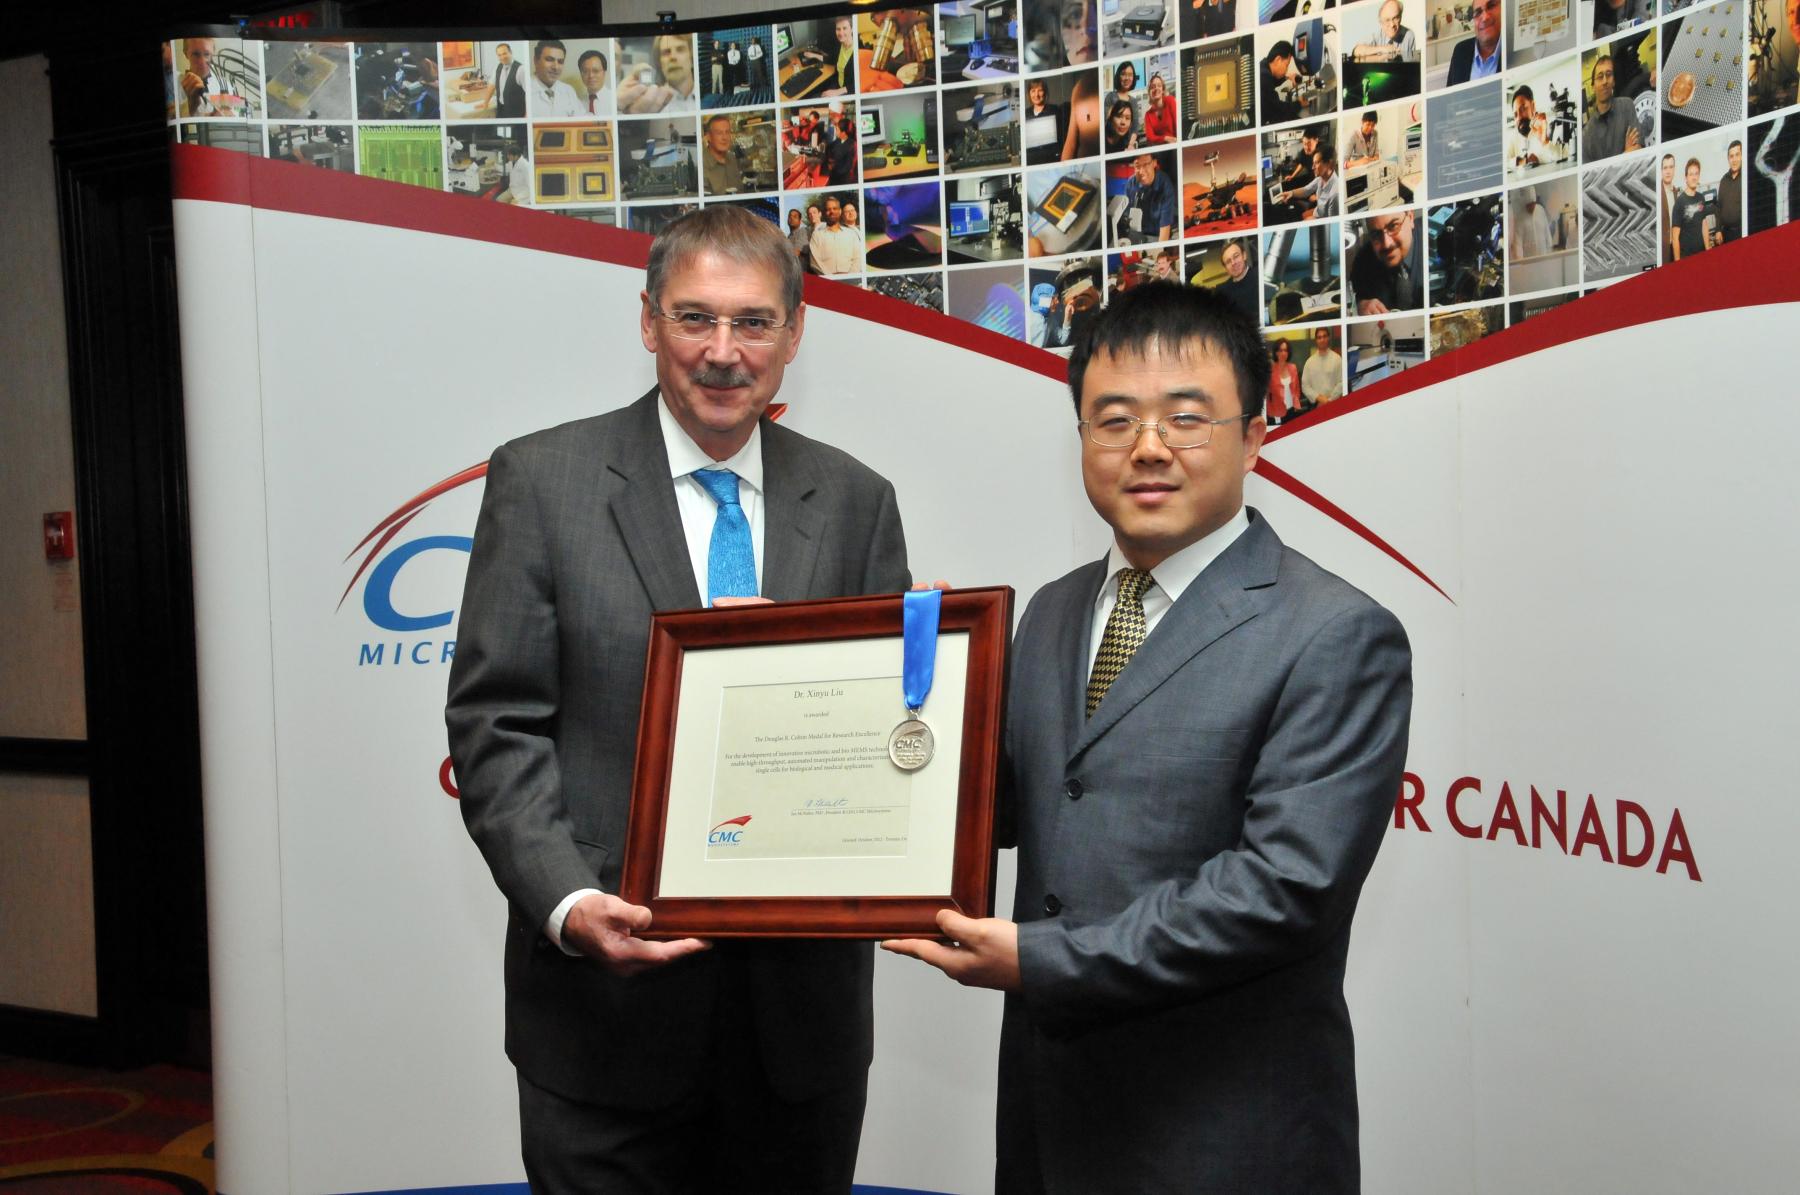 Dr. Ian McWalter & Dr. Xinyu Liu holding Colton certificate and medal